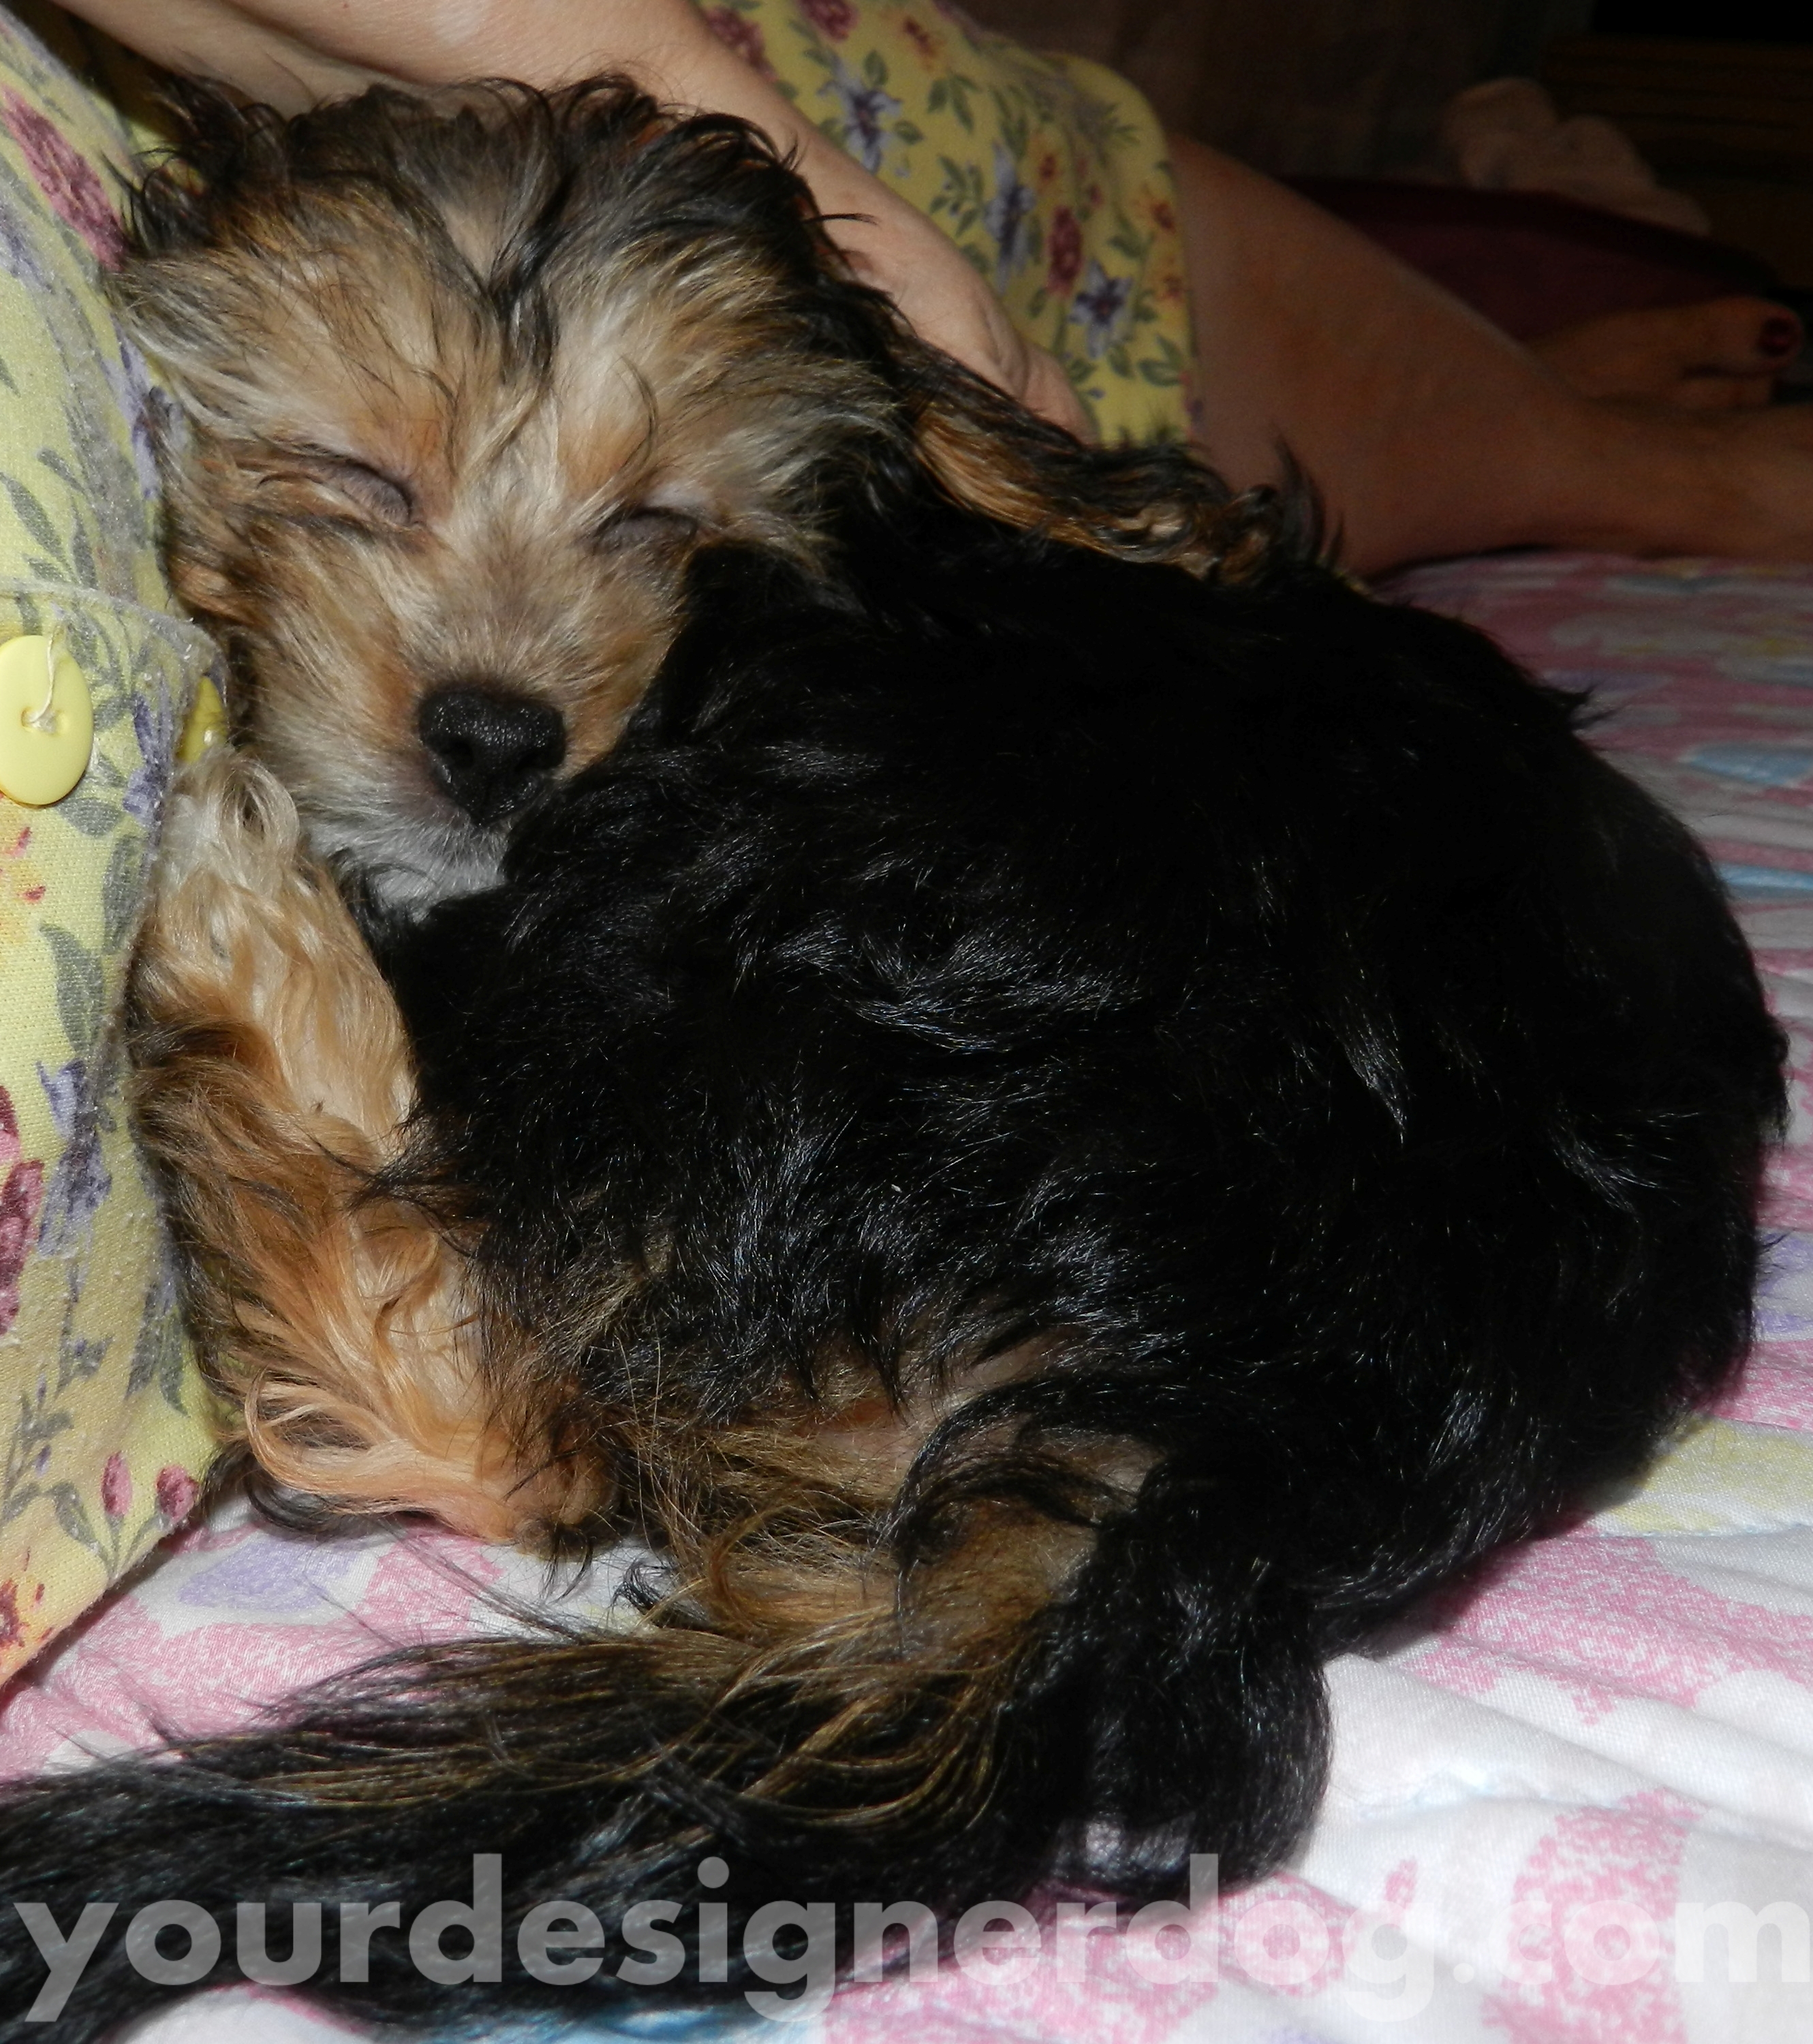 dogs, designer dogs, yorkipoo, yorkie poo, puppy, sleepy puppy, cute puppy pictures